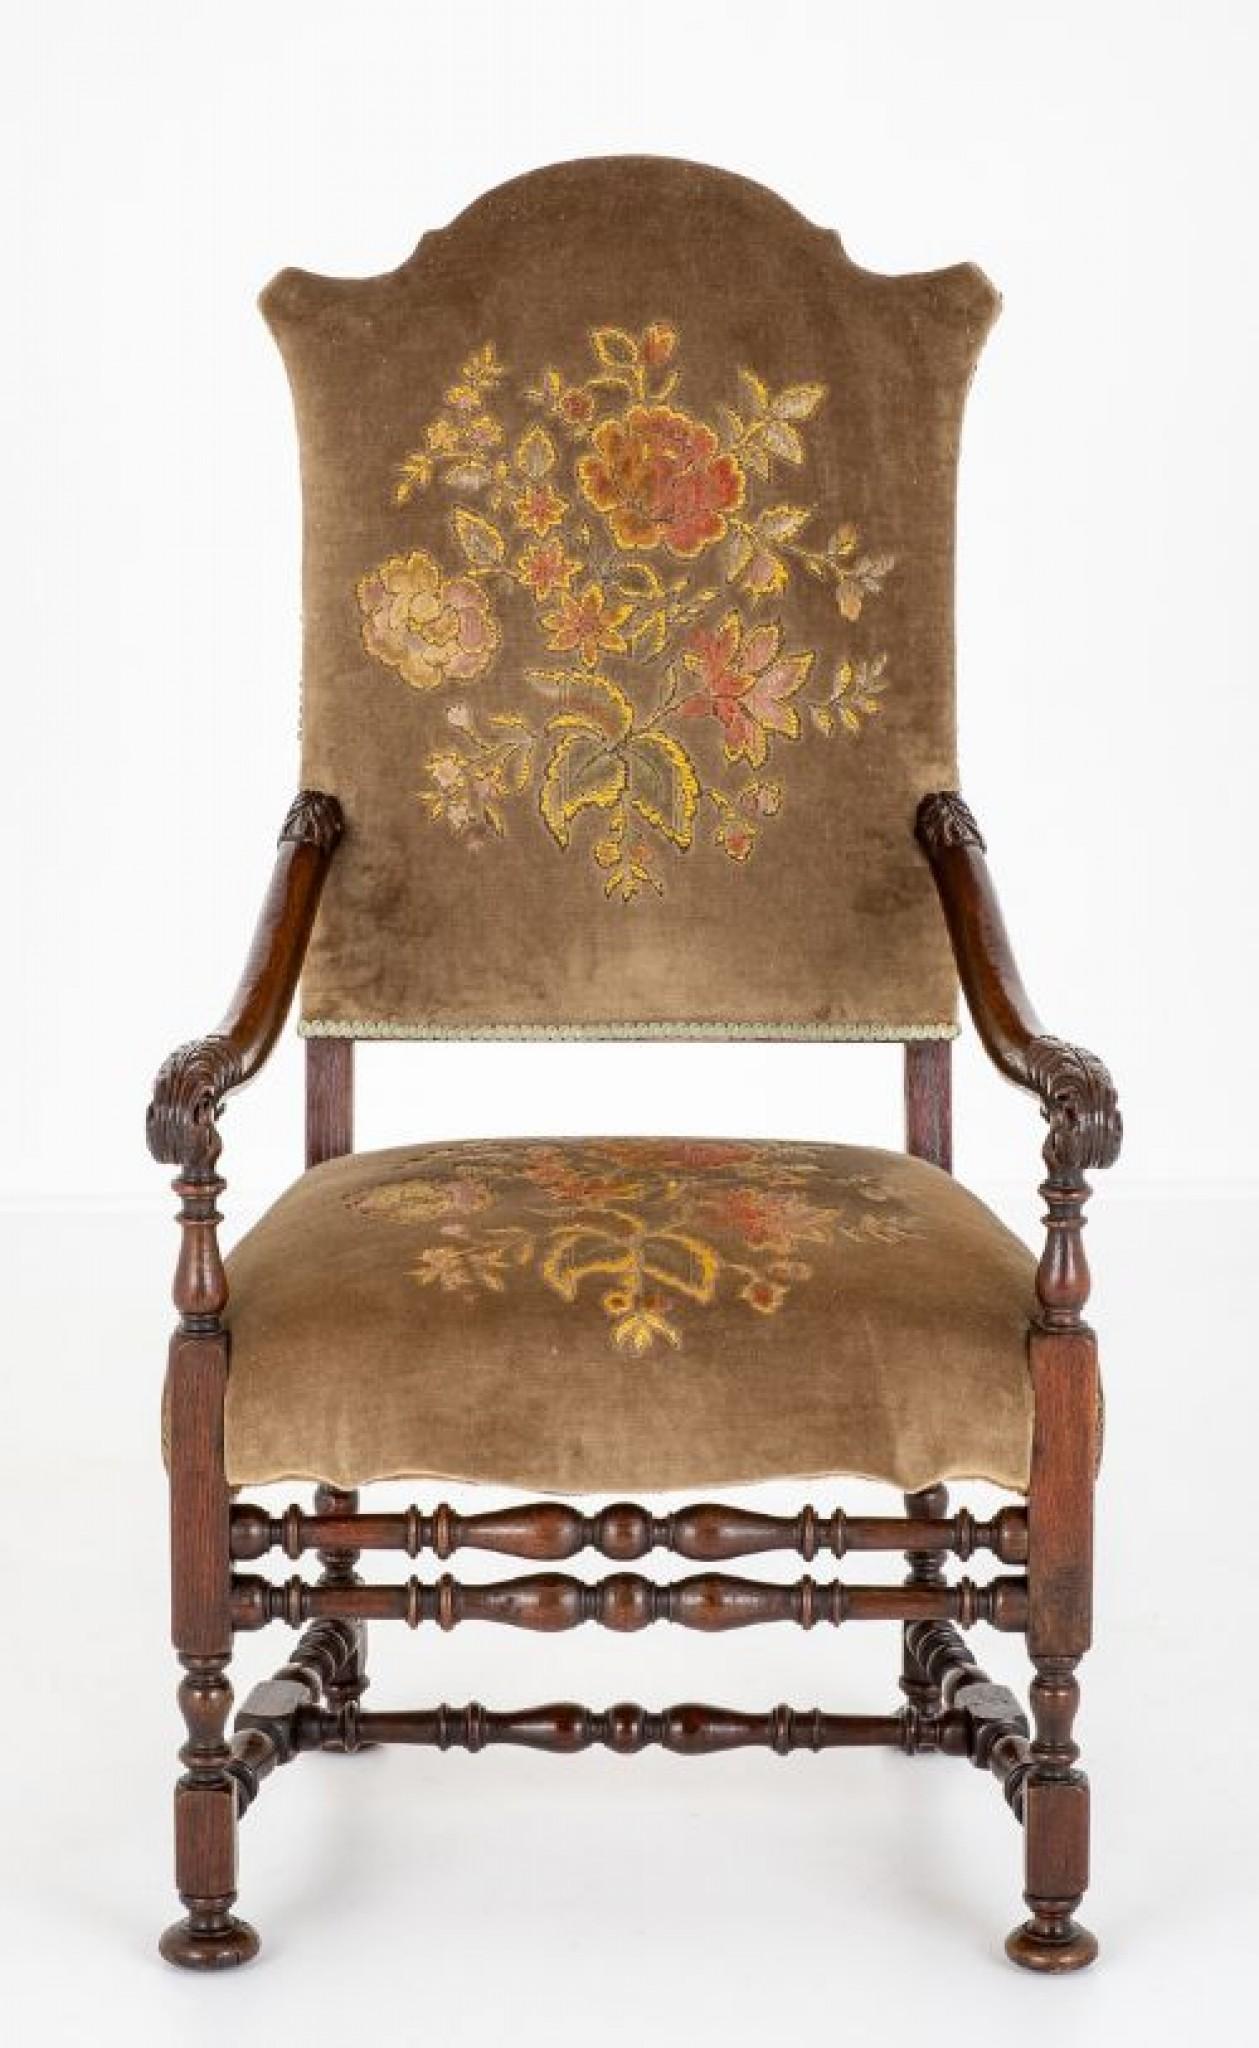 Oak Jacobean style arm chair.
This chair is raised upon ring turned front legs with ring turned stretchers and an 